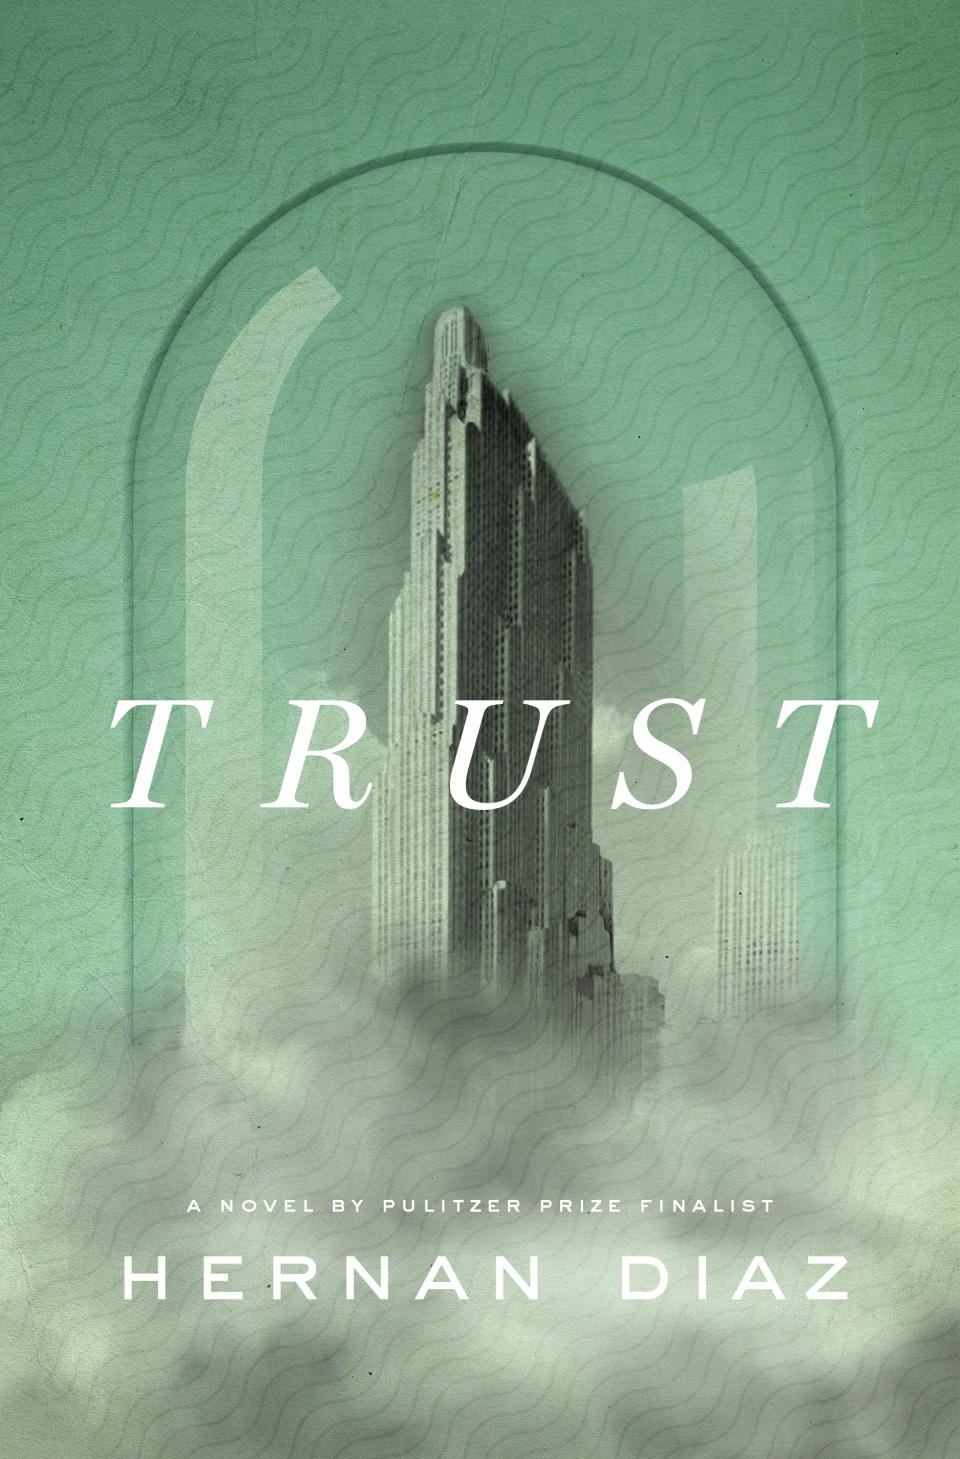 This cover image released by Riverhead Books shows "Trust" by Hernan Diaz, winner of the Pulitzer Prize for fiction. (Riverhead Books via AP)